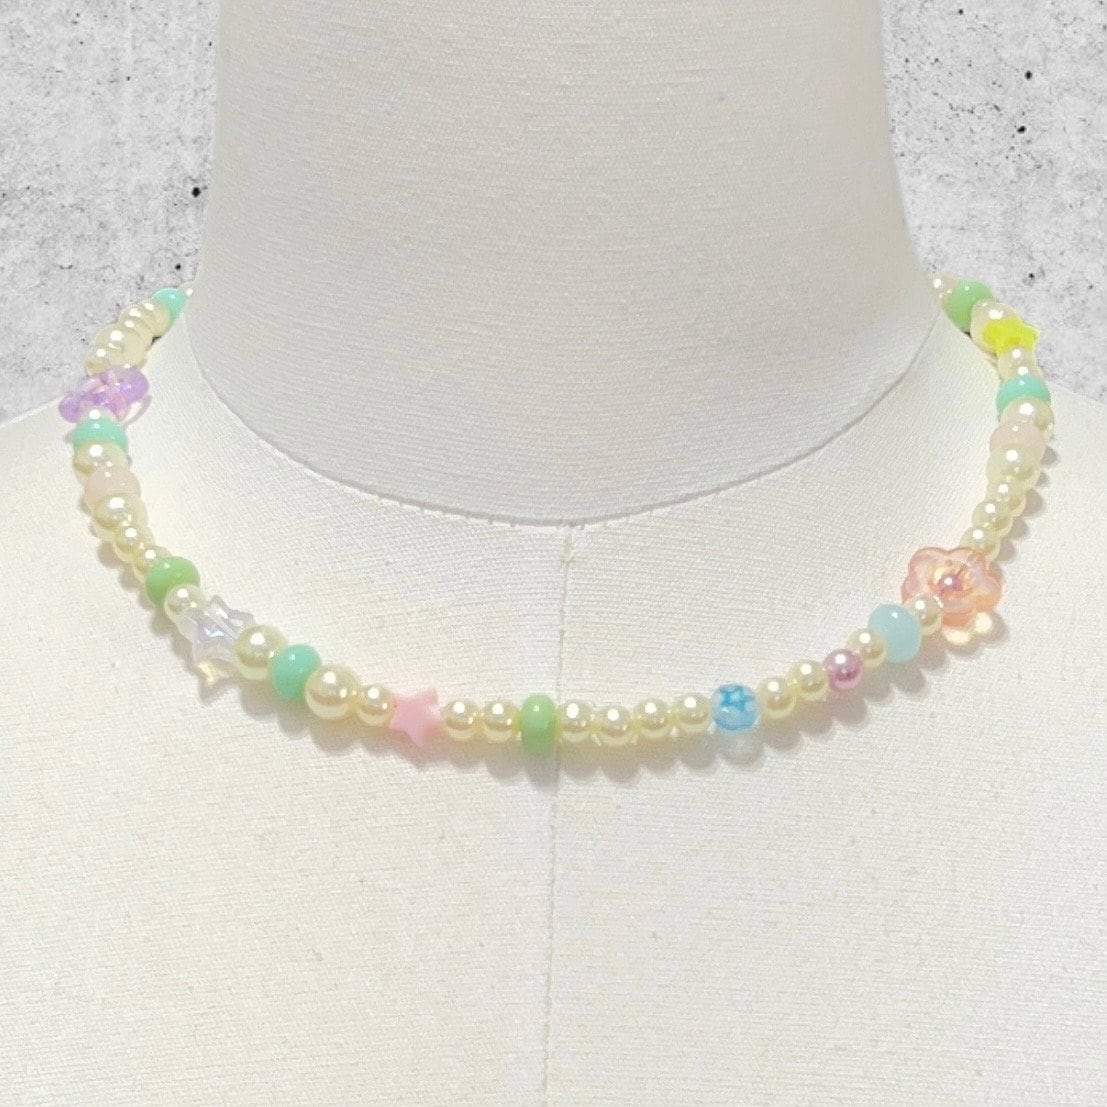 Handmade Pearls and Pastel Beaded Choker Necklace by Extra Kitsch. Stars and butterflies displayed on a mannequin.